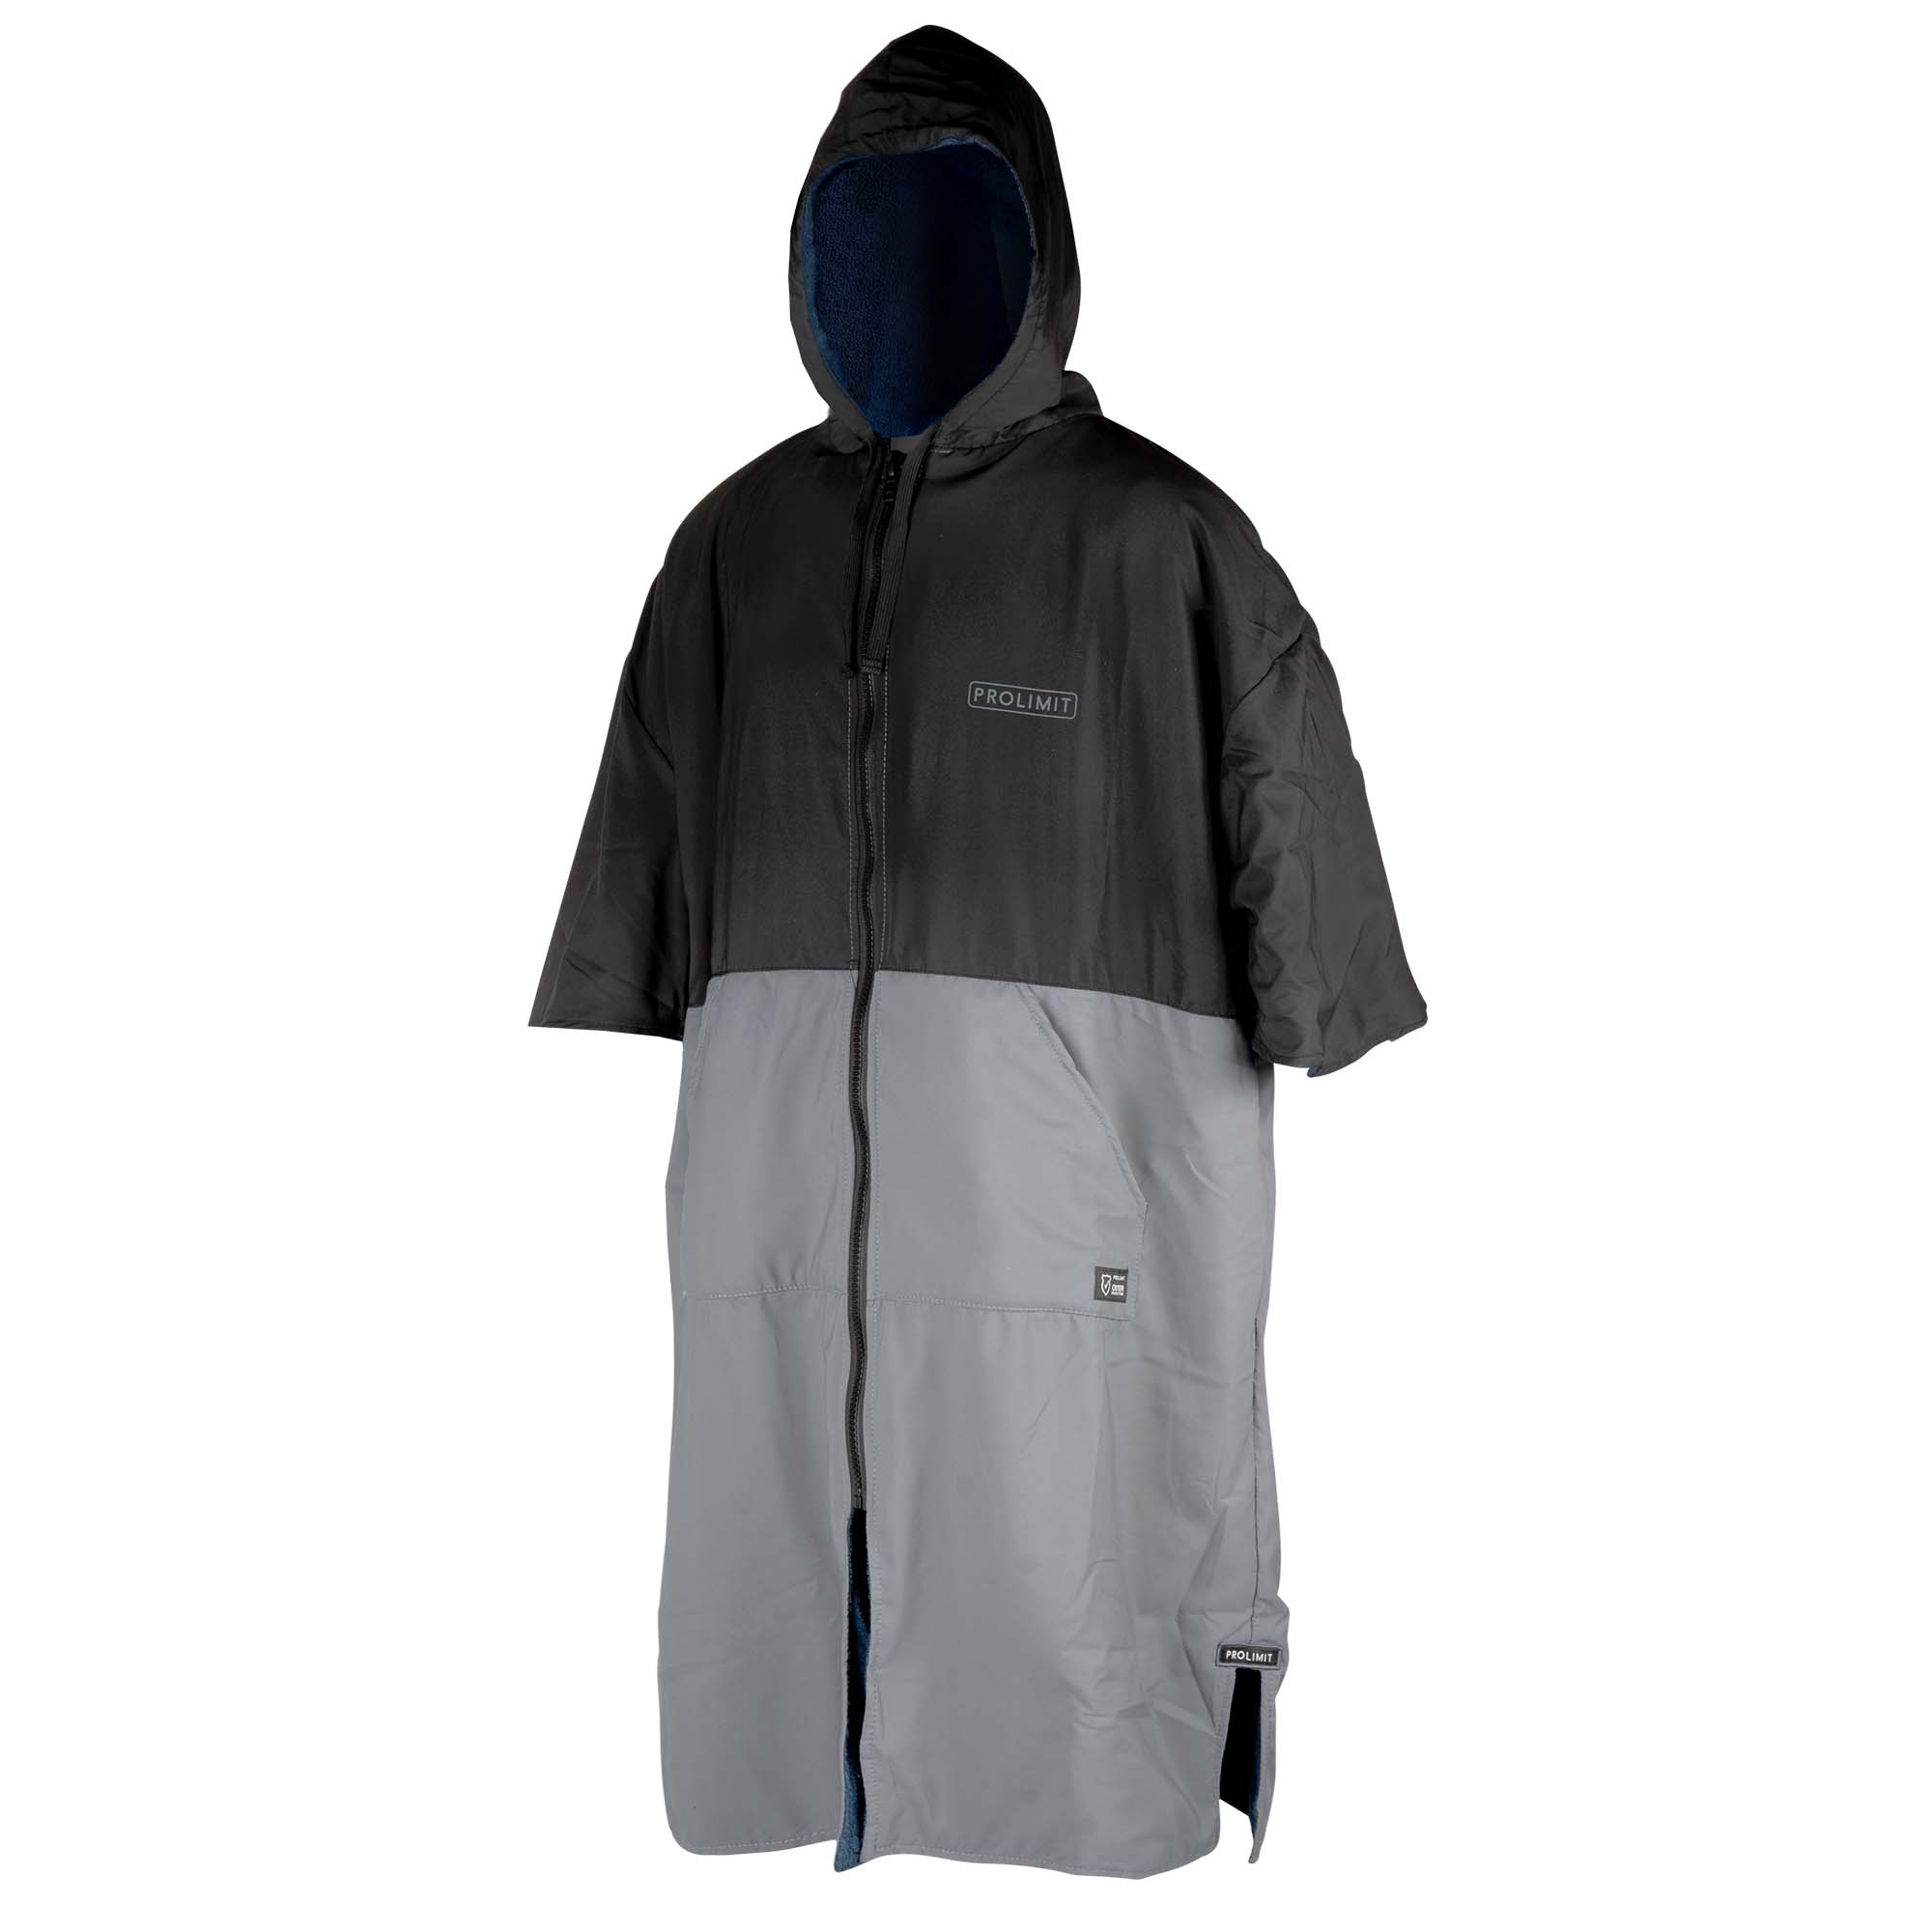 Prolimit - Water repellent poncho with zipper - Xtreme - Black/Navy